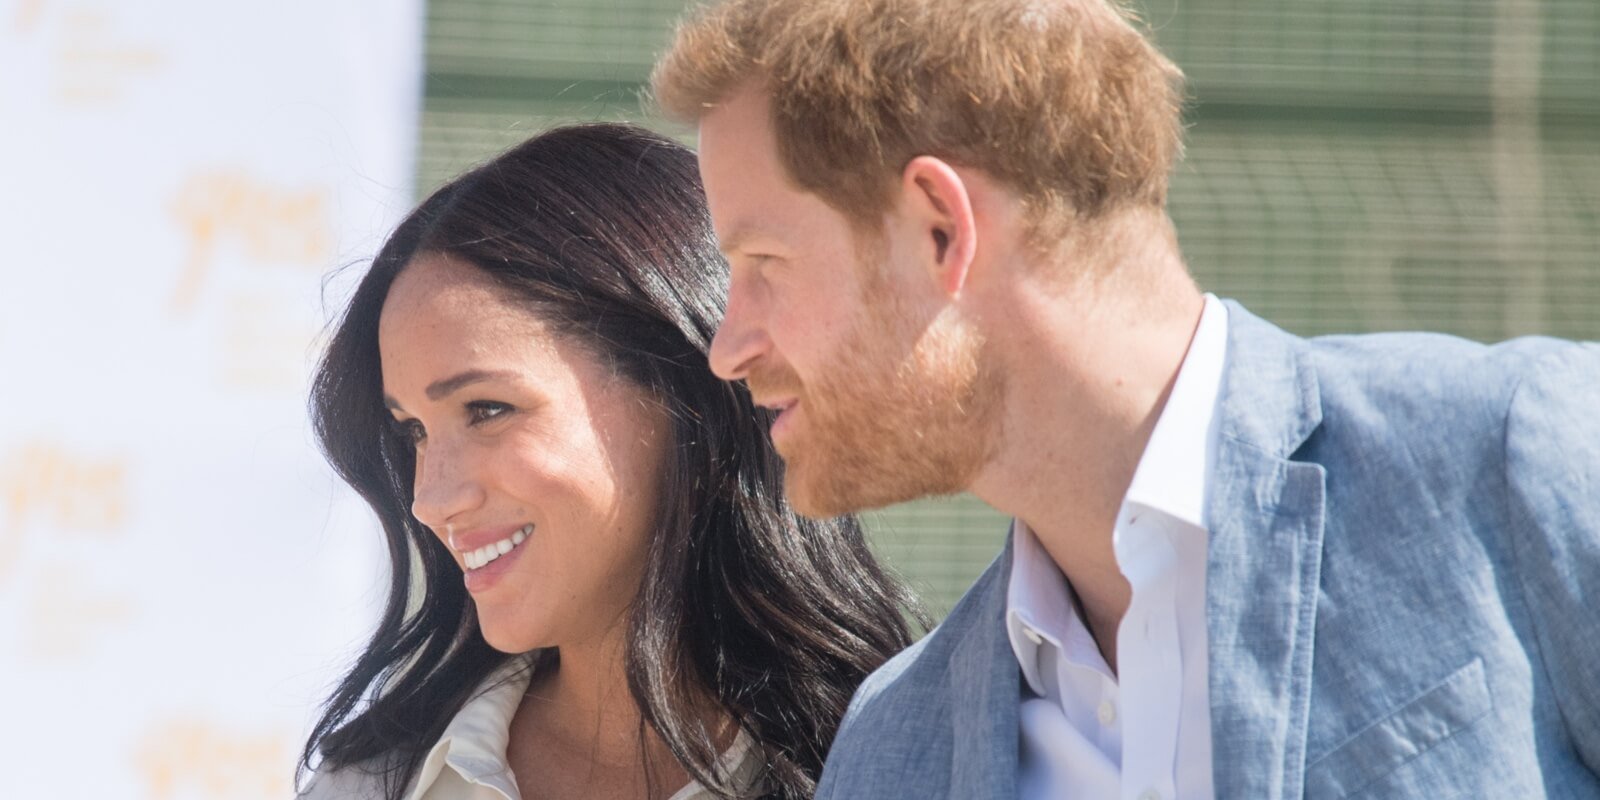 Meghan Markle and Prince Harry on October 02, 2019 in Tembisa, South Africa.